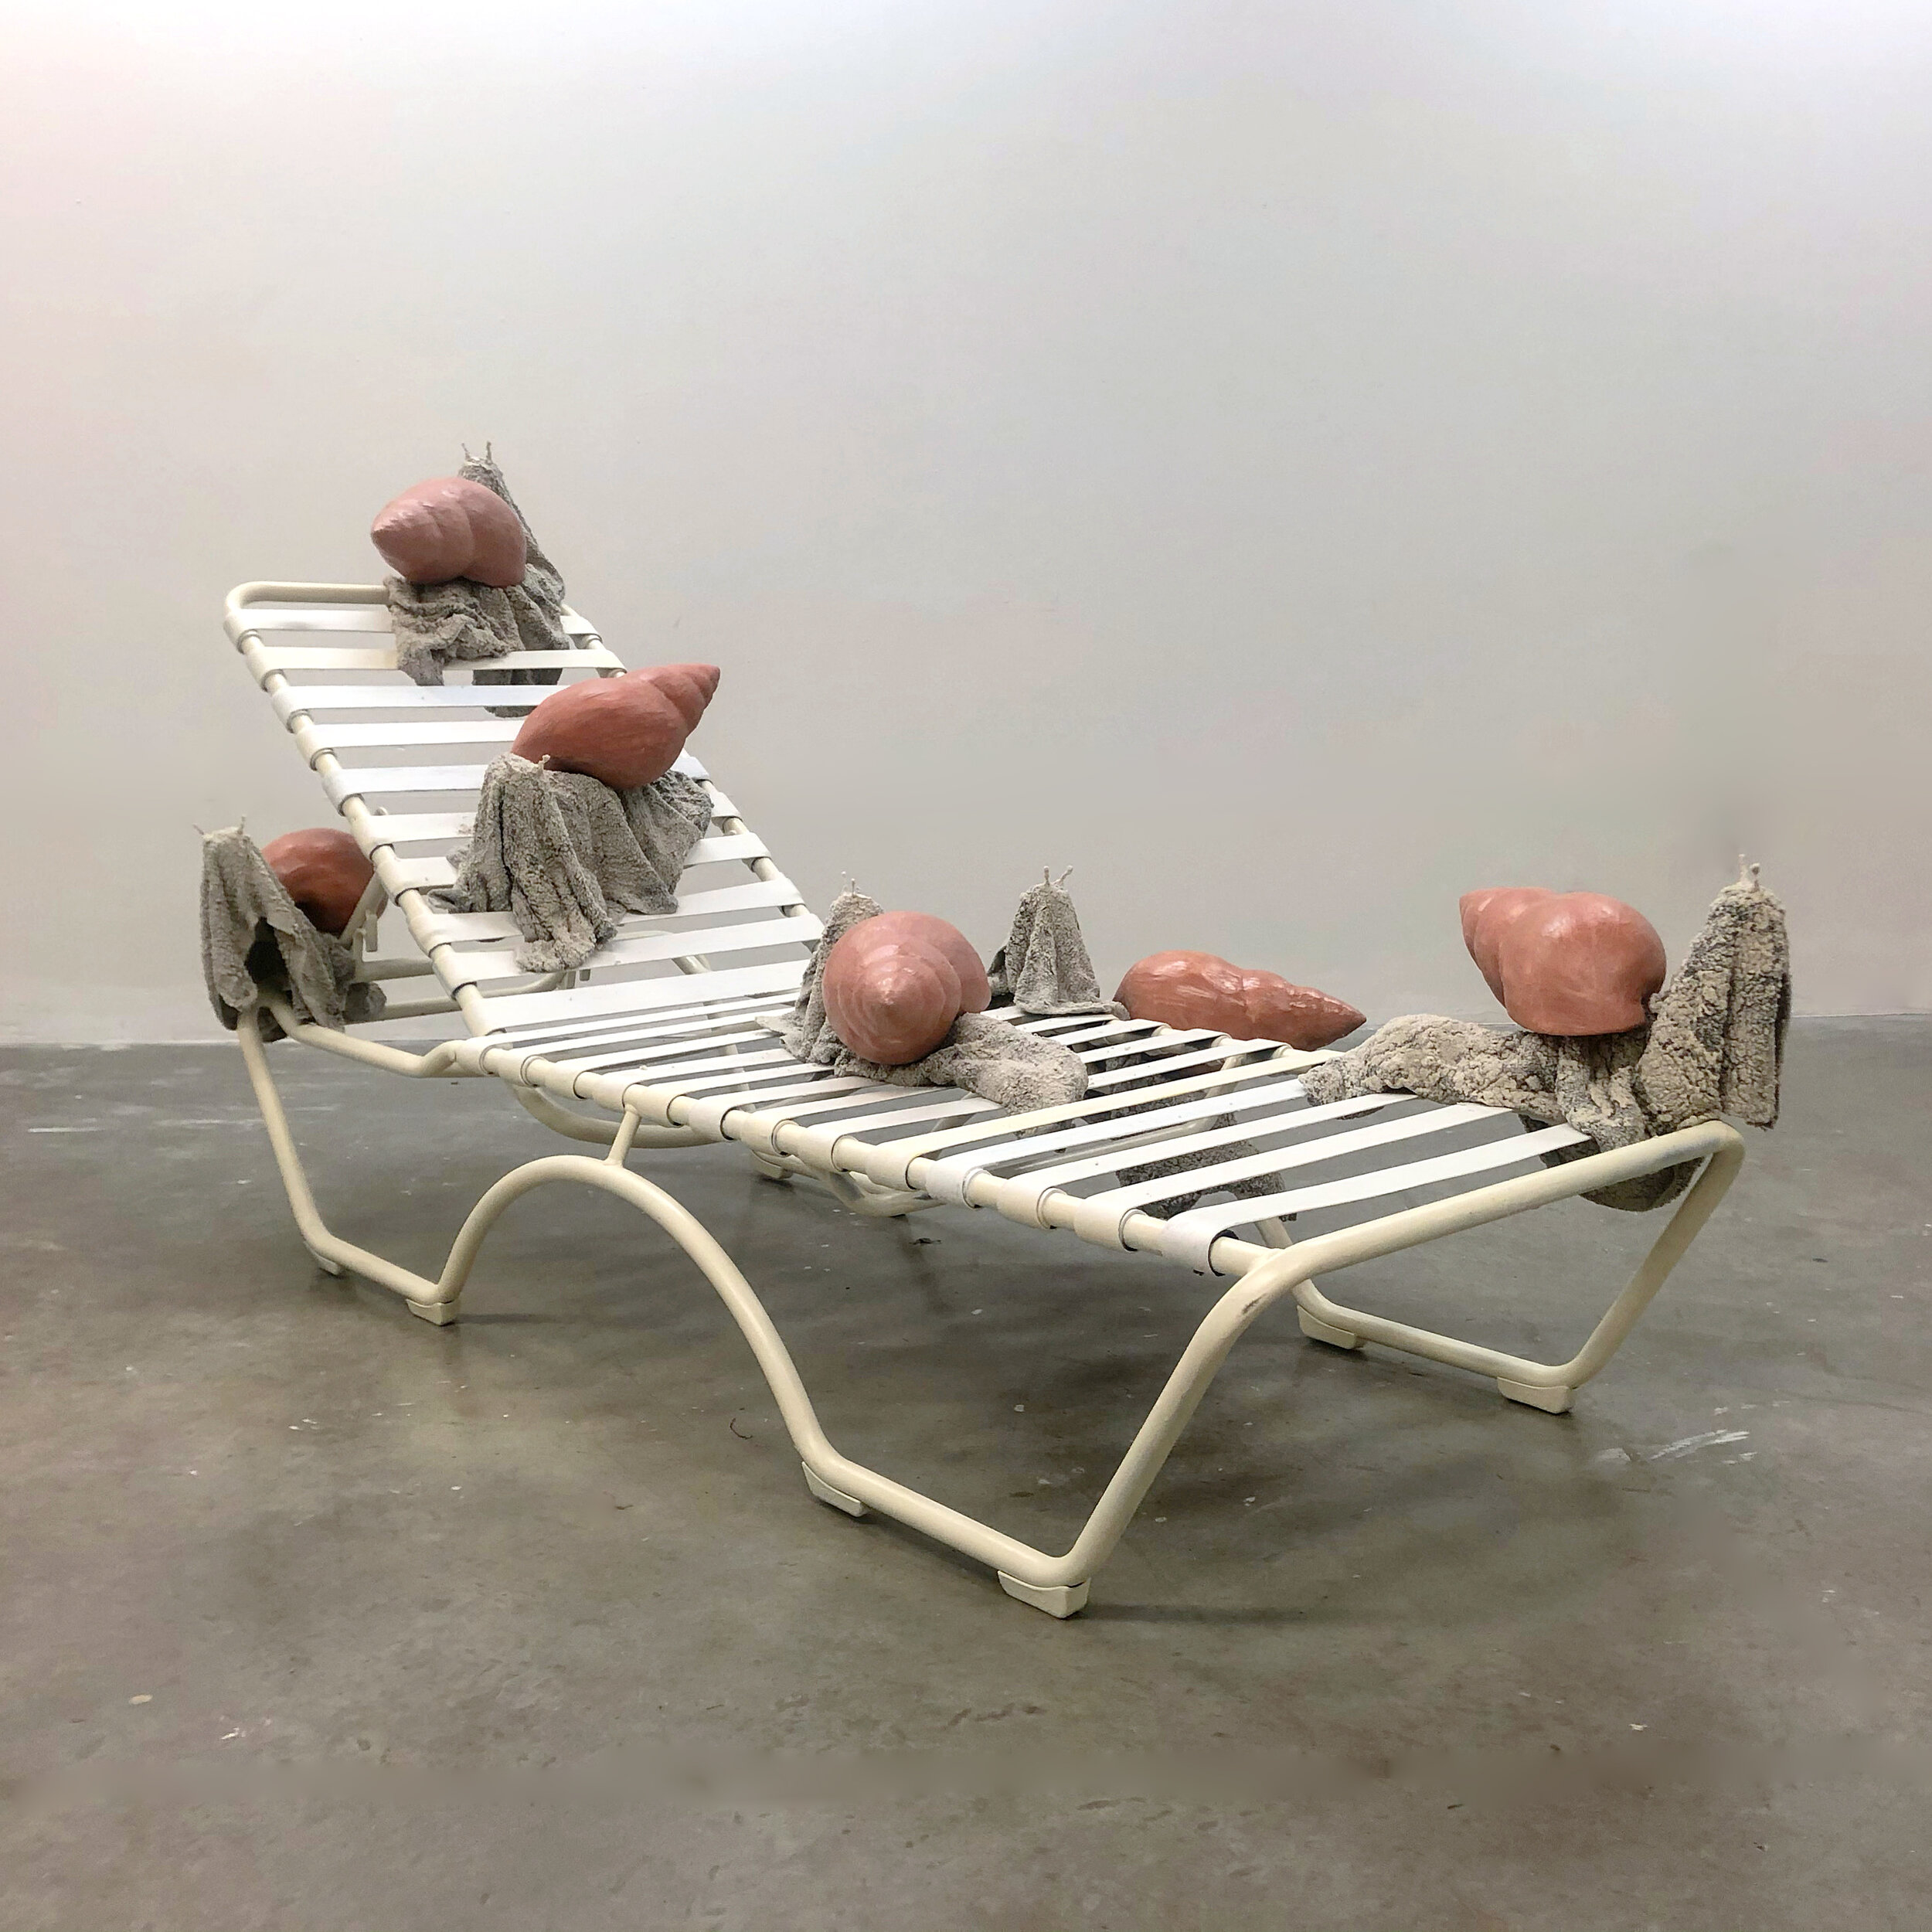  Alex Zak  Ship of Fools , 2020 Modified lounge chair, towels, pearl sewing needles, sand, epoxy resin, foam, paint 54 x 108 x 48 inches (137 x 274 x 122 cm) 